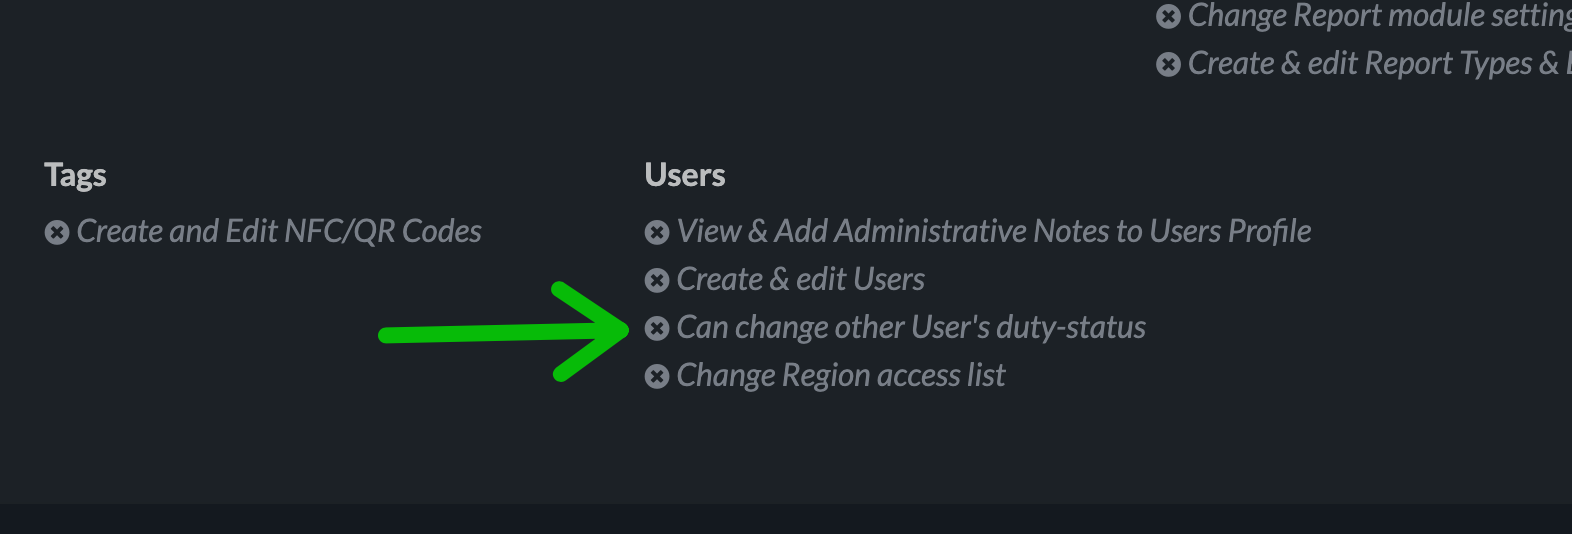 Can Change other User's duty-status permission highlighted. User currently doesn't have that permission.